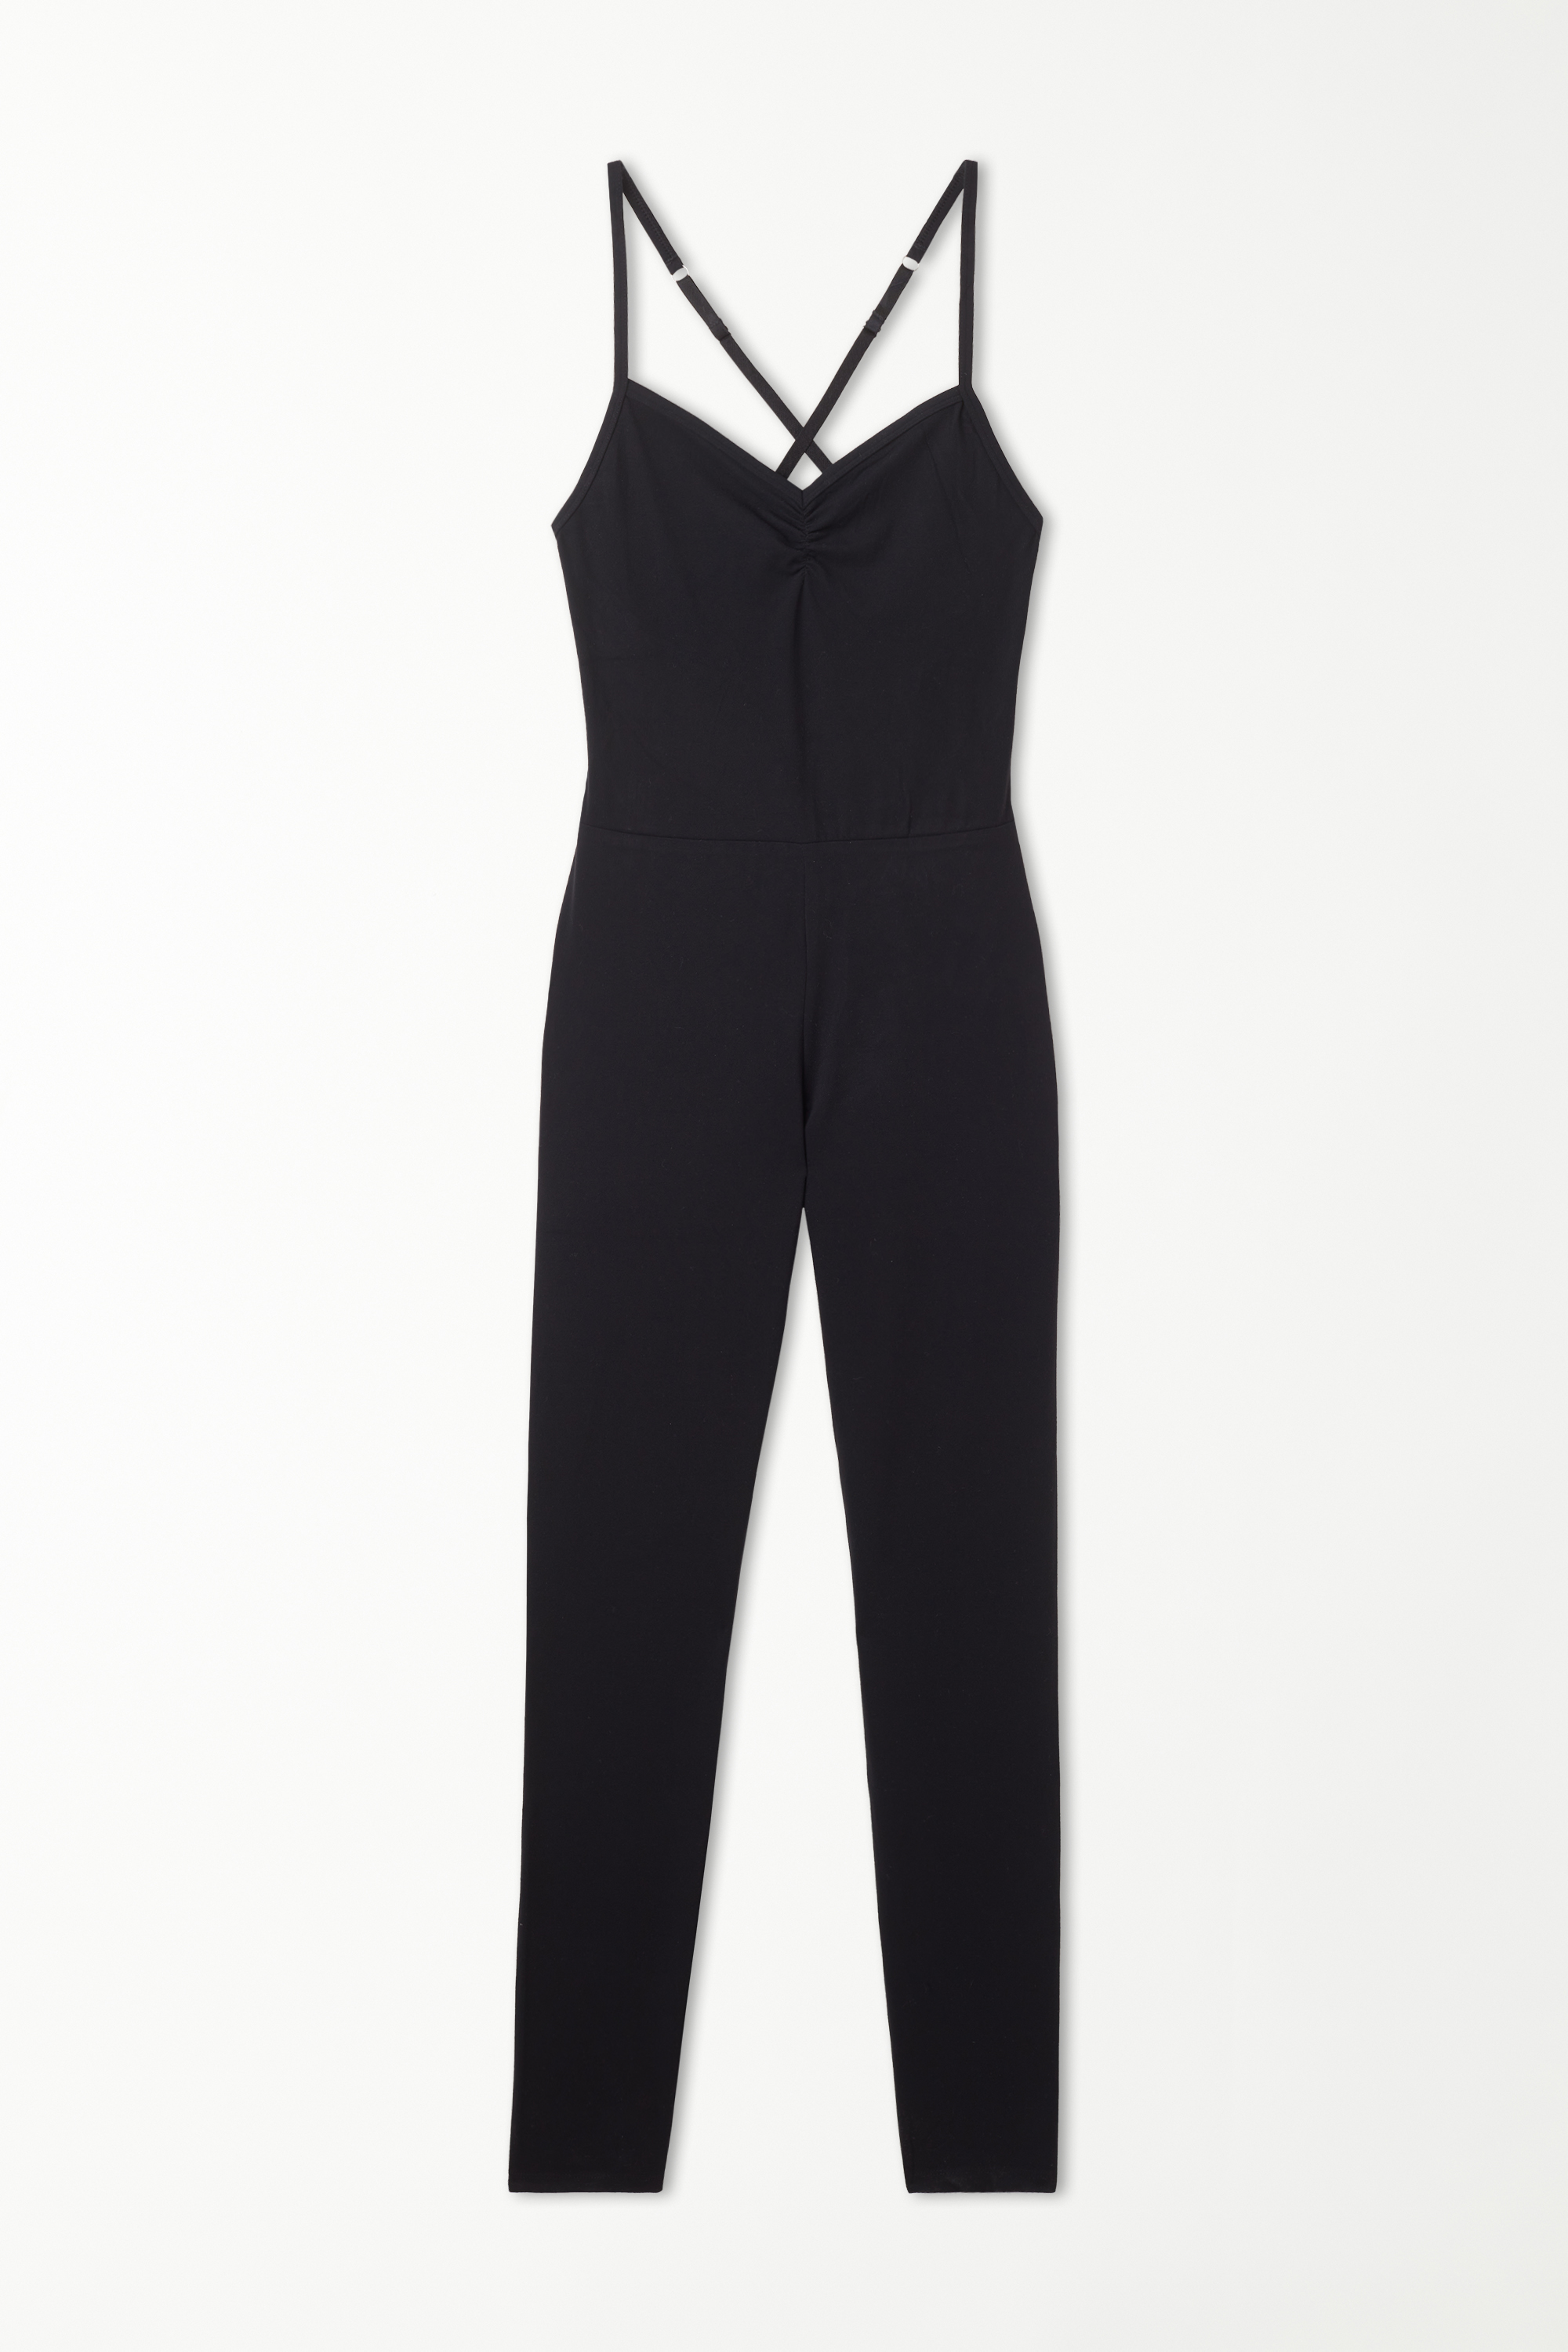 Long Soft Microfibre Short Bodysuit with Narrow Shoulder Straps and Gathering